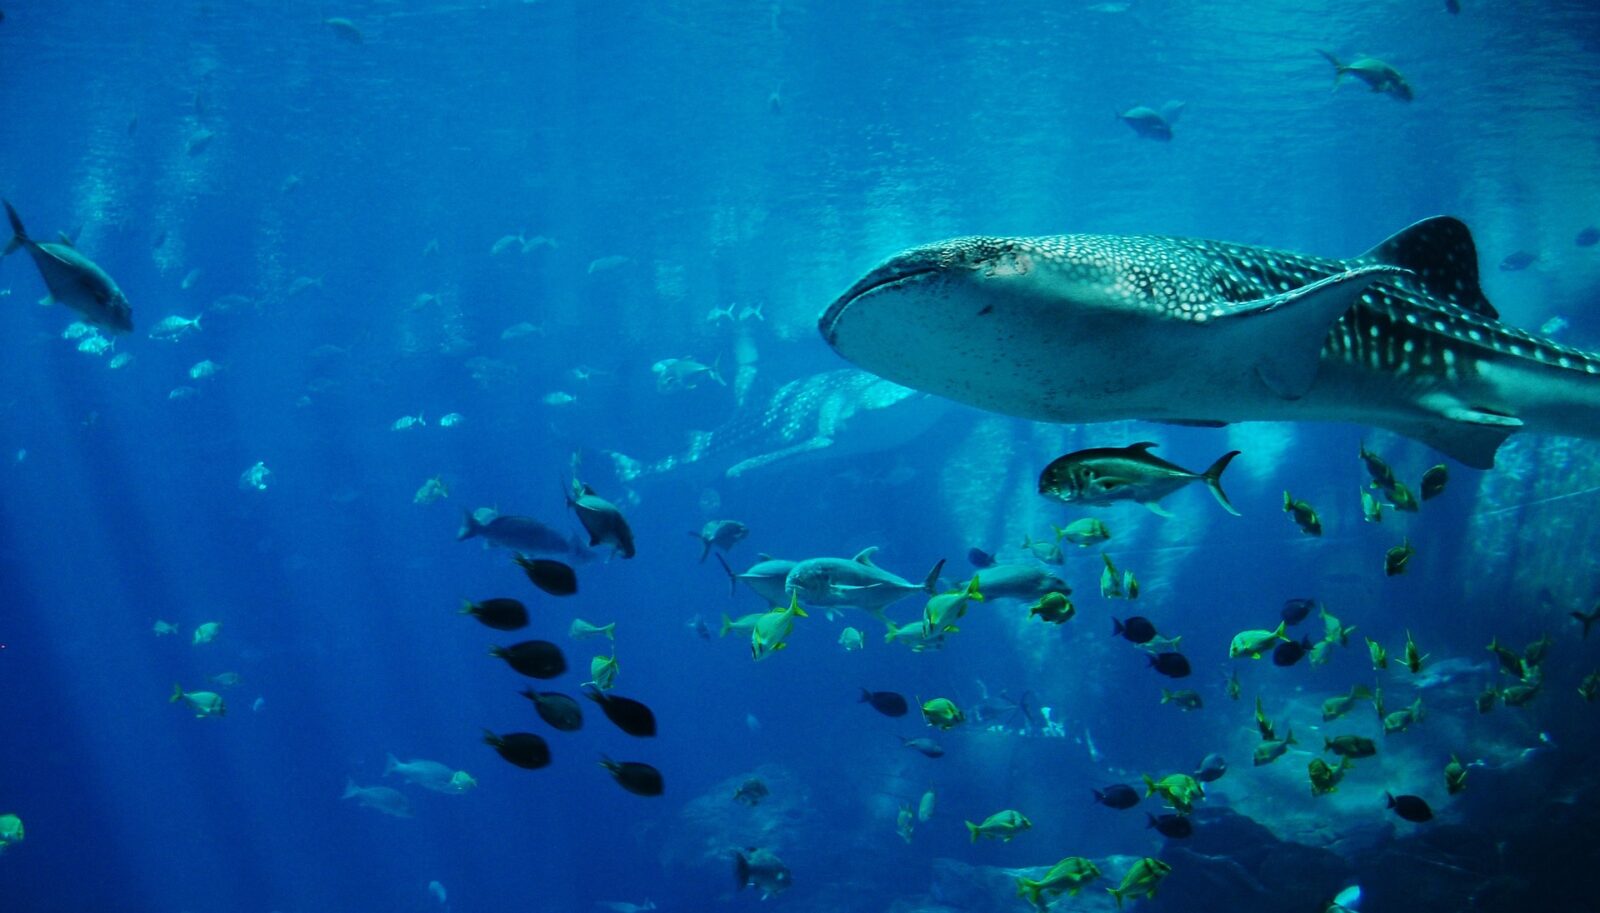 A whale shark and tropical fish, in deep blue sea. Photo: Domingo Trejo